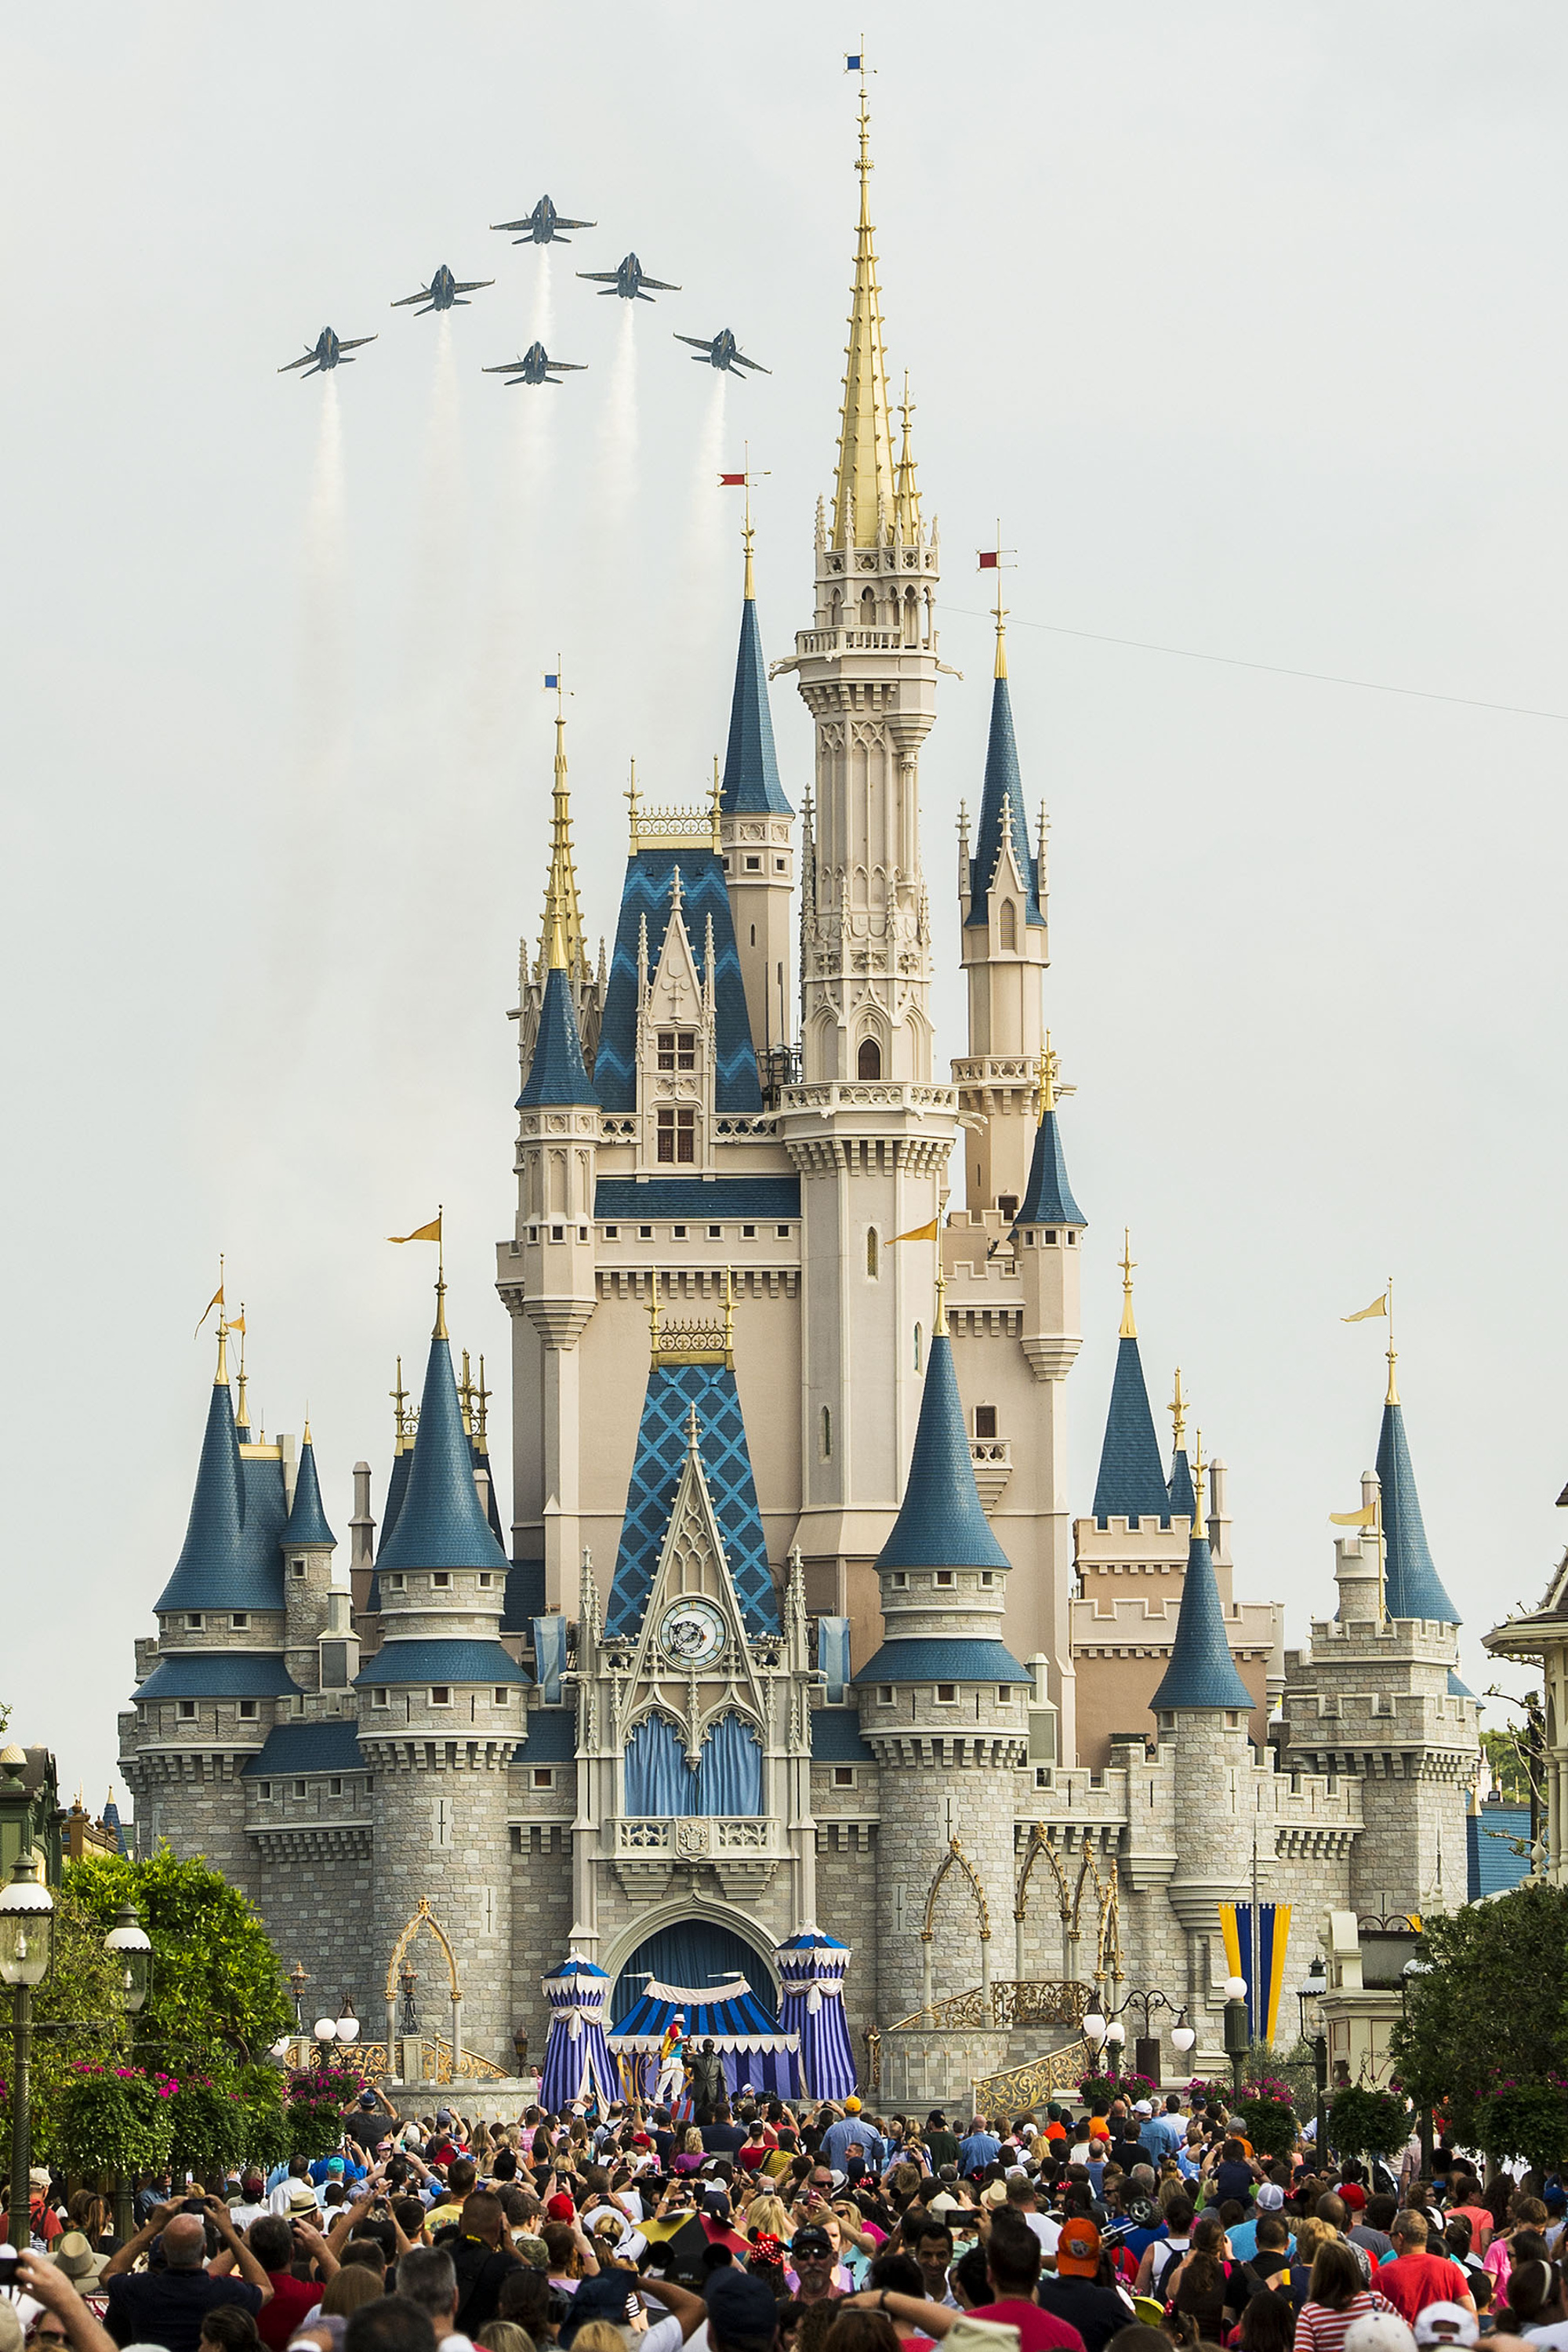 In this handout photo provided by Disney Parks, in a special moment for Magic Kingdom guests, the U.S. Navy Flight Demonstration Squadron, the Blue Angels, streaked across the skies above Cinderella Castle March 19, 2015 at Walt Disney World Resort in Lake Buena Vista, Florida.  The flyover featured the Blue Angels' six-jet F/A-18 Hornet Delta Formation making two dramatic passes above the Magic Kingdom, with Cinderella Castle as a focal point, en route to an air show in Florida. (Matt StroshaneHandout&amp;mdash;Disney Parks/Getty Images)